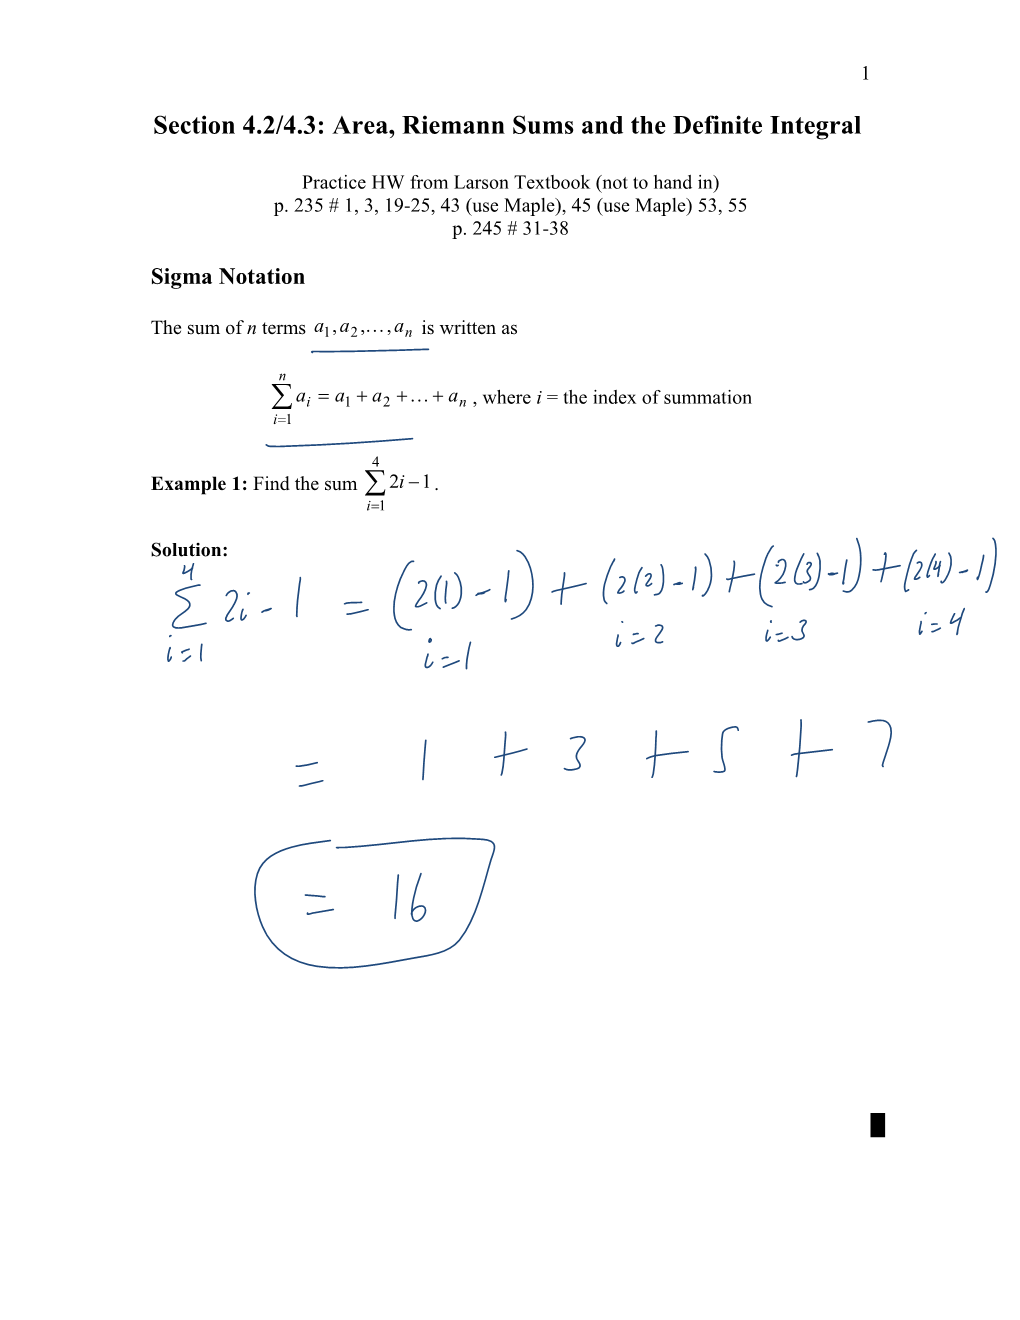 Section 4.2/4.3: Area, Riemann Sums and the Definite Integral